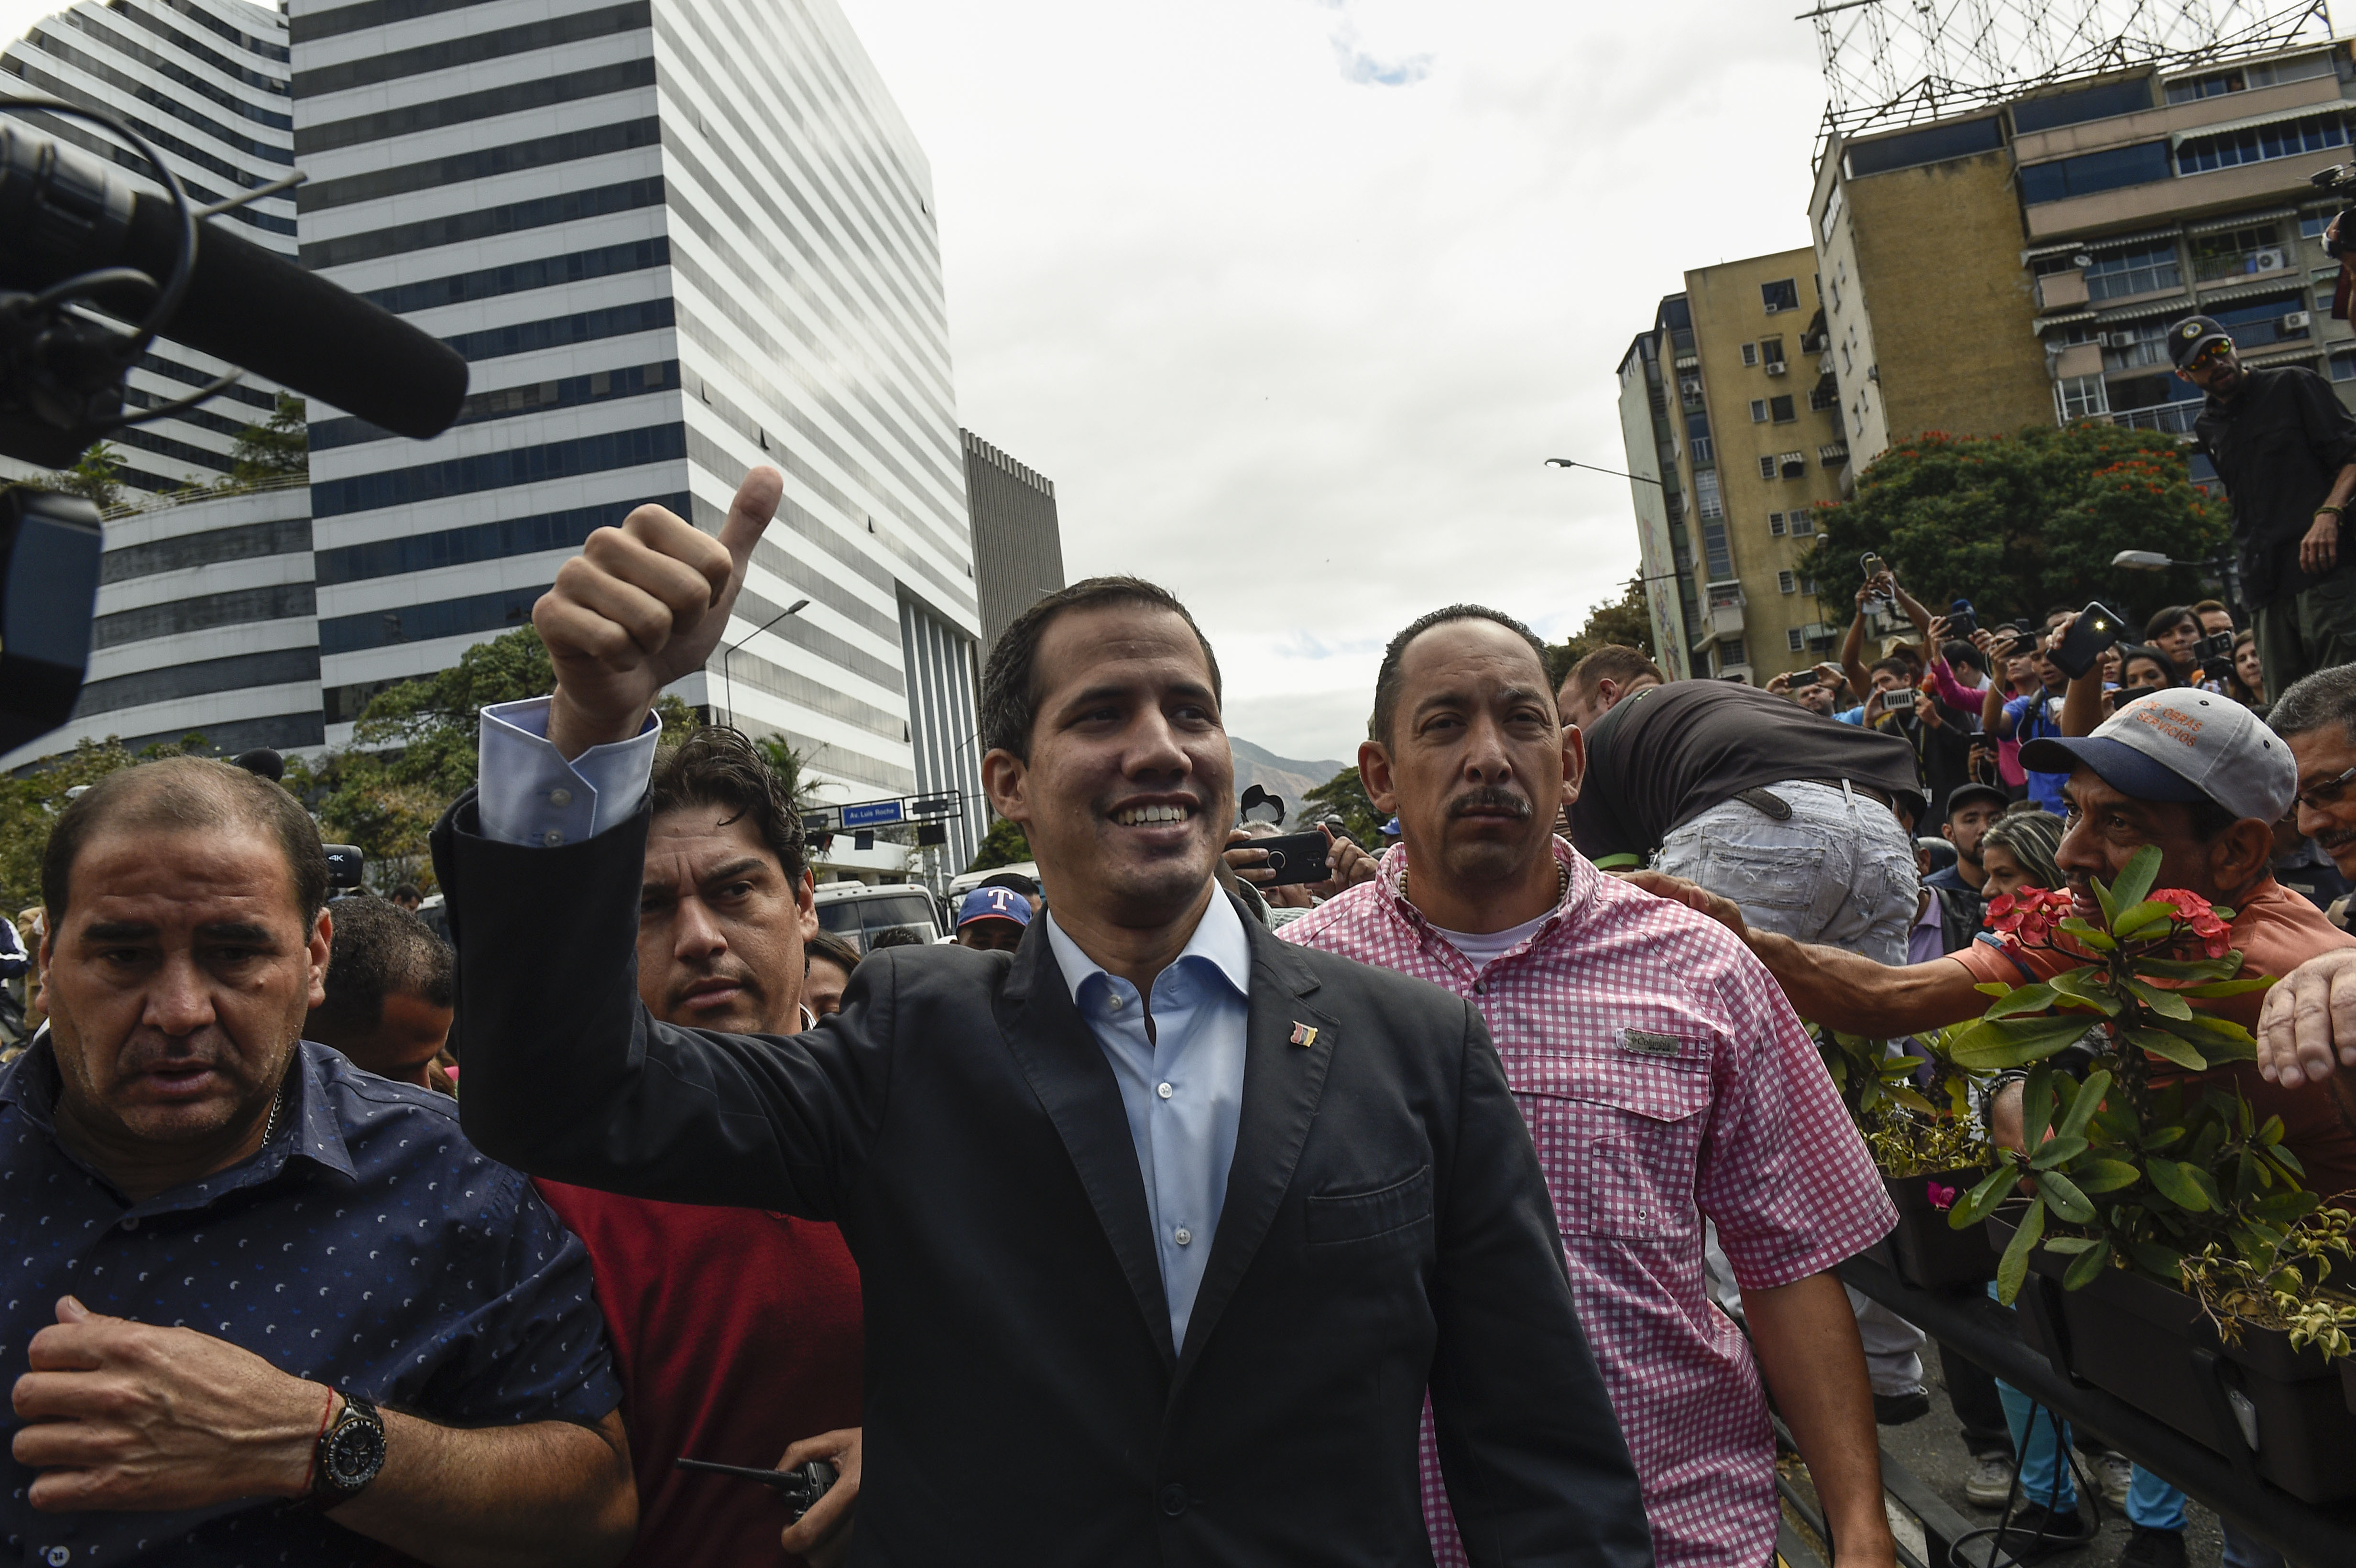 Venezuelan opposition leader and self declared acting president Juan Guaido (C), arrives to take part in a demonstration called by the transportation sector to support him, in Caracas on February 20, 2019. (FEDERICO PARRA/AFP/Getty Images)